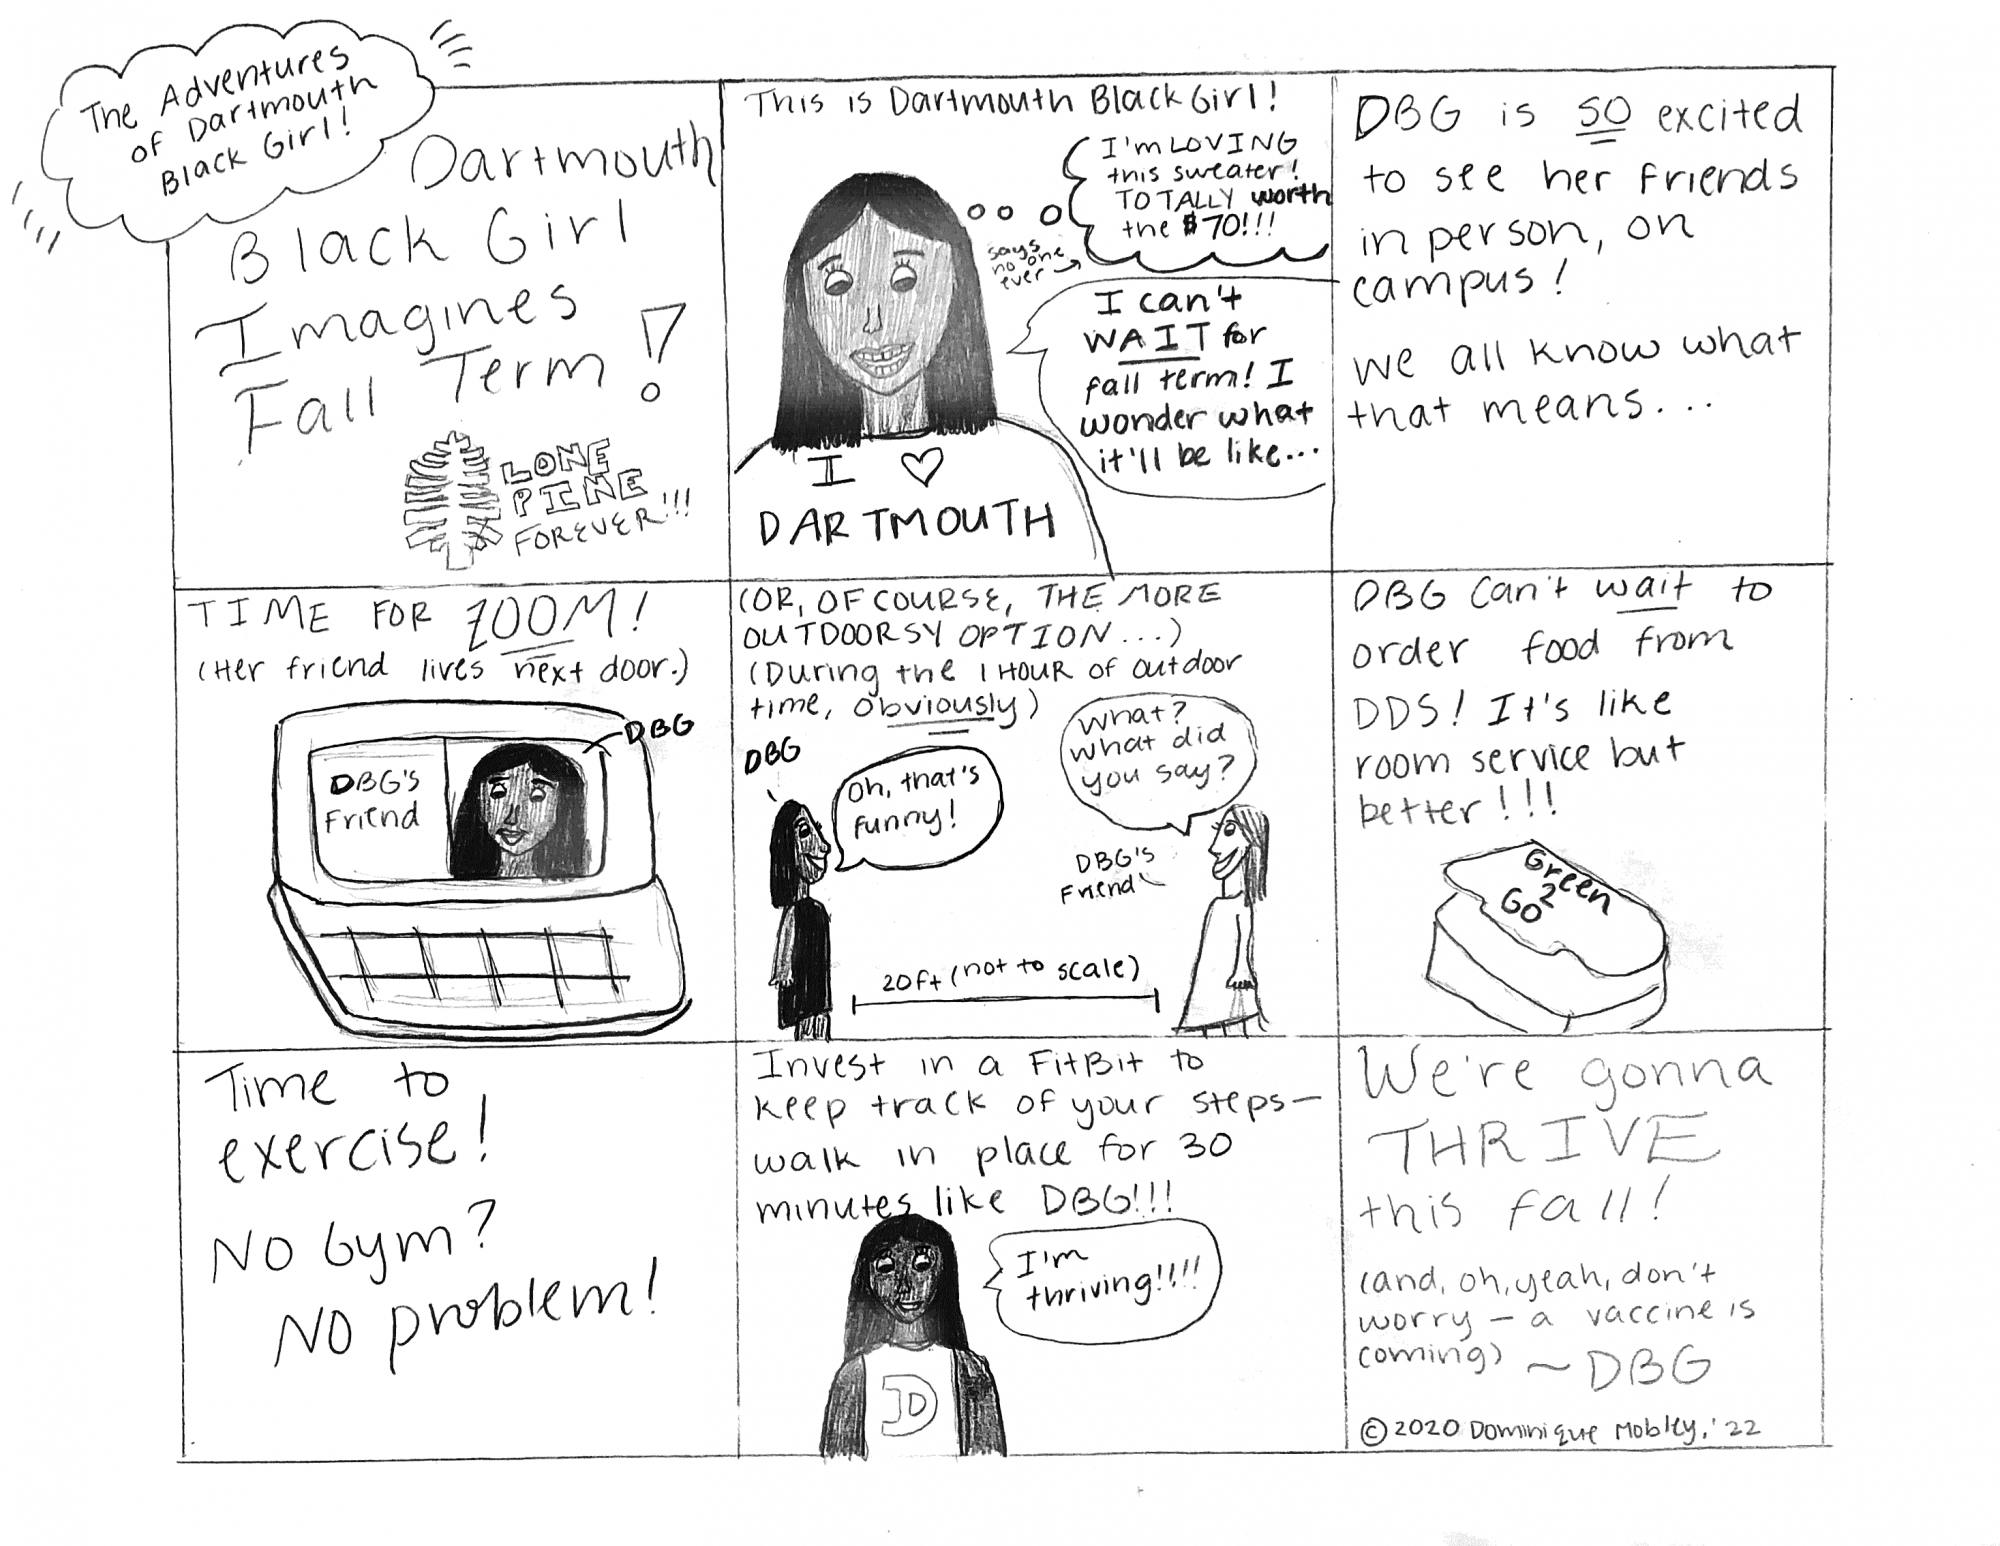 Dominique Mobley Cartoon to Be Published 8_14.PNG